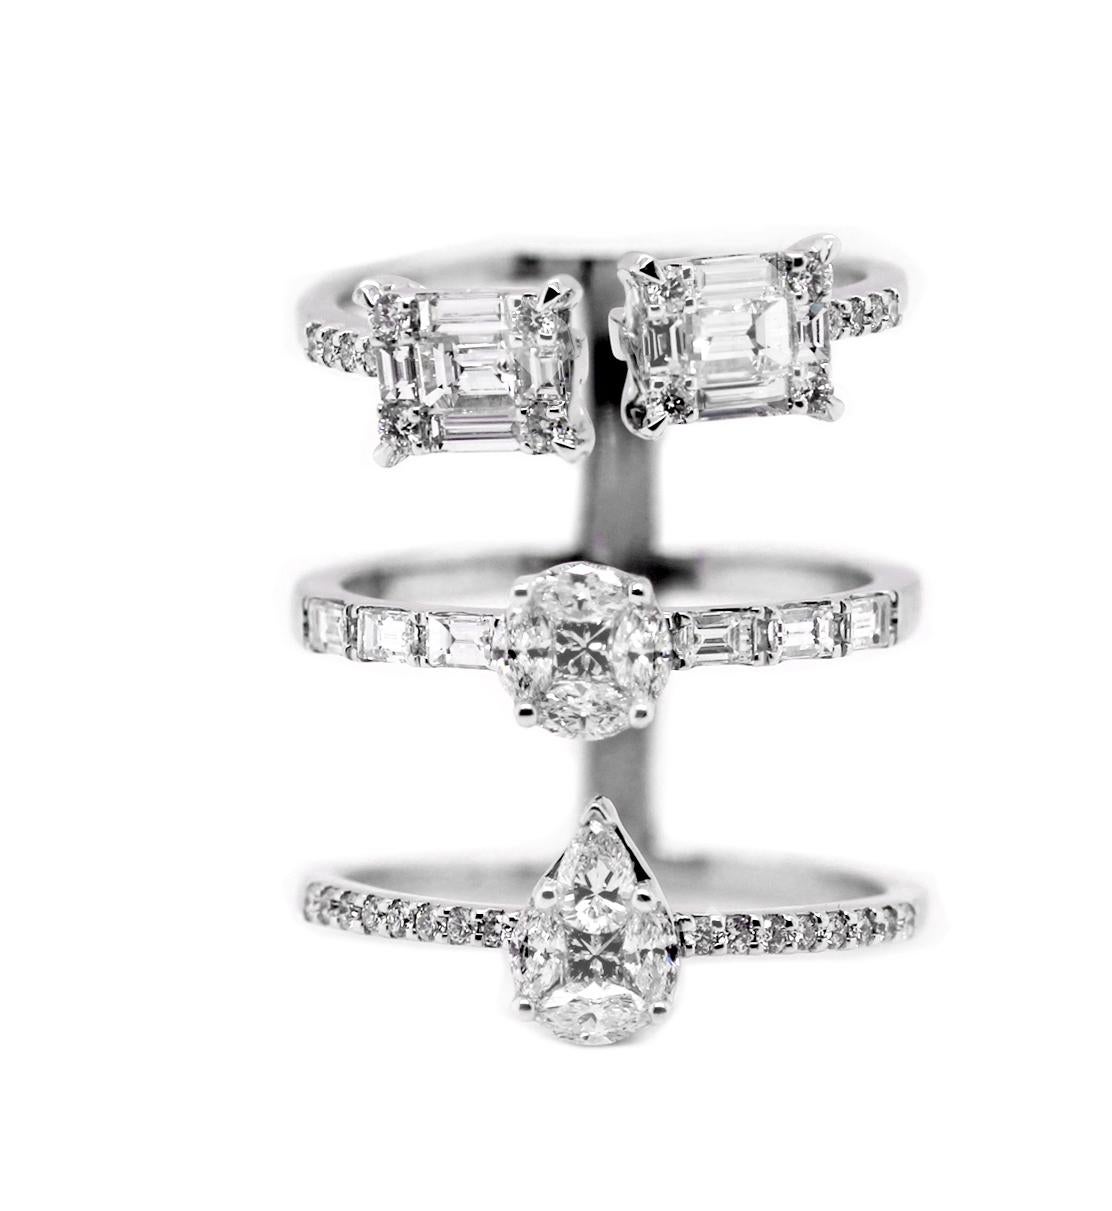 A one-piece three layer stacking-style ring featuring pearshape, round and rectangular clusters comprising marquise, pearshape, princess cut, baguette and round cut diamonds cleverly positioned to look like one larger stone at each tier.  With